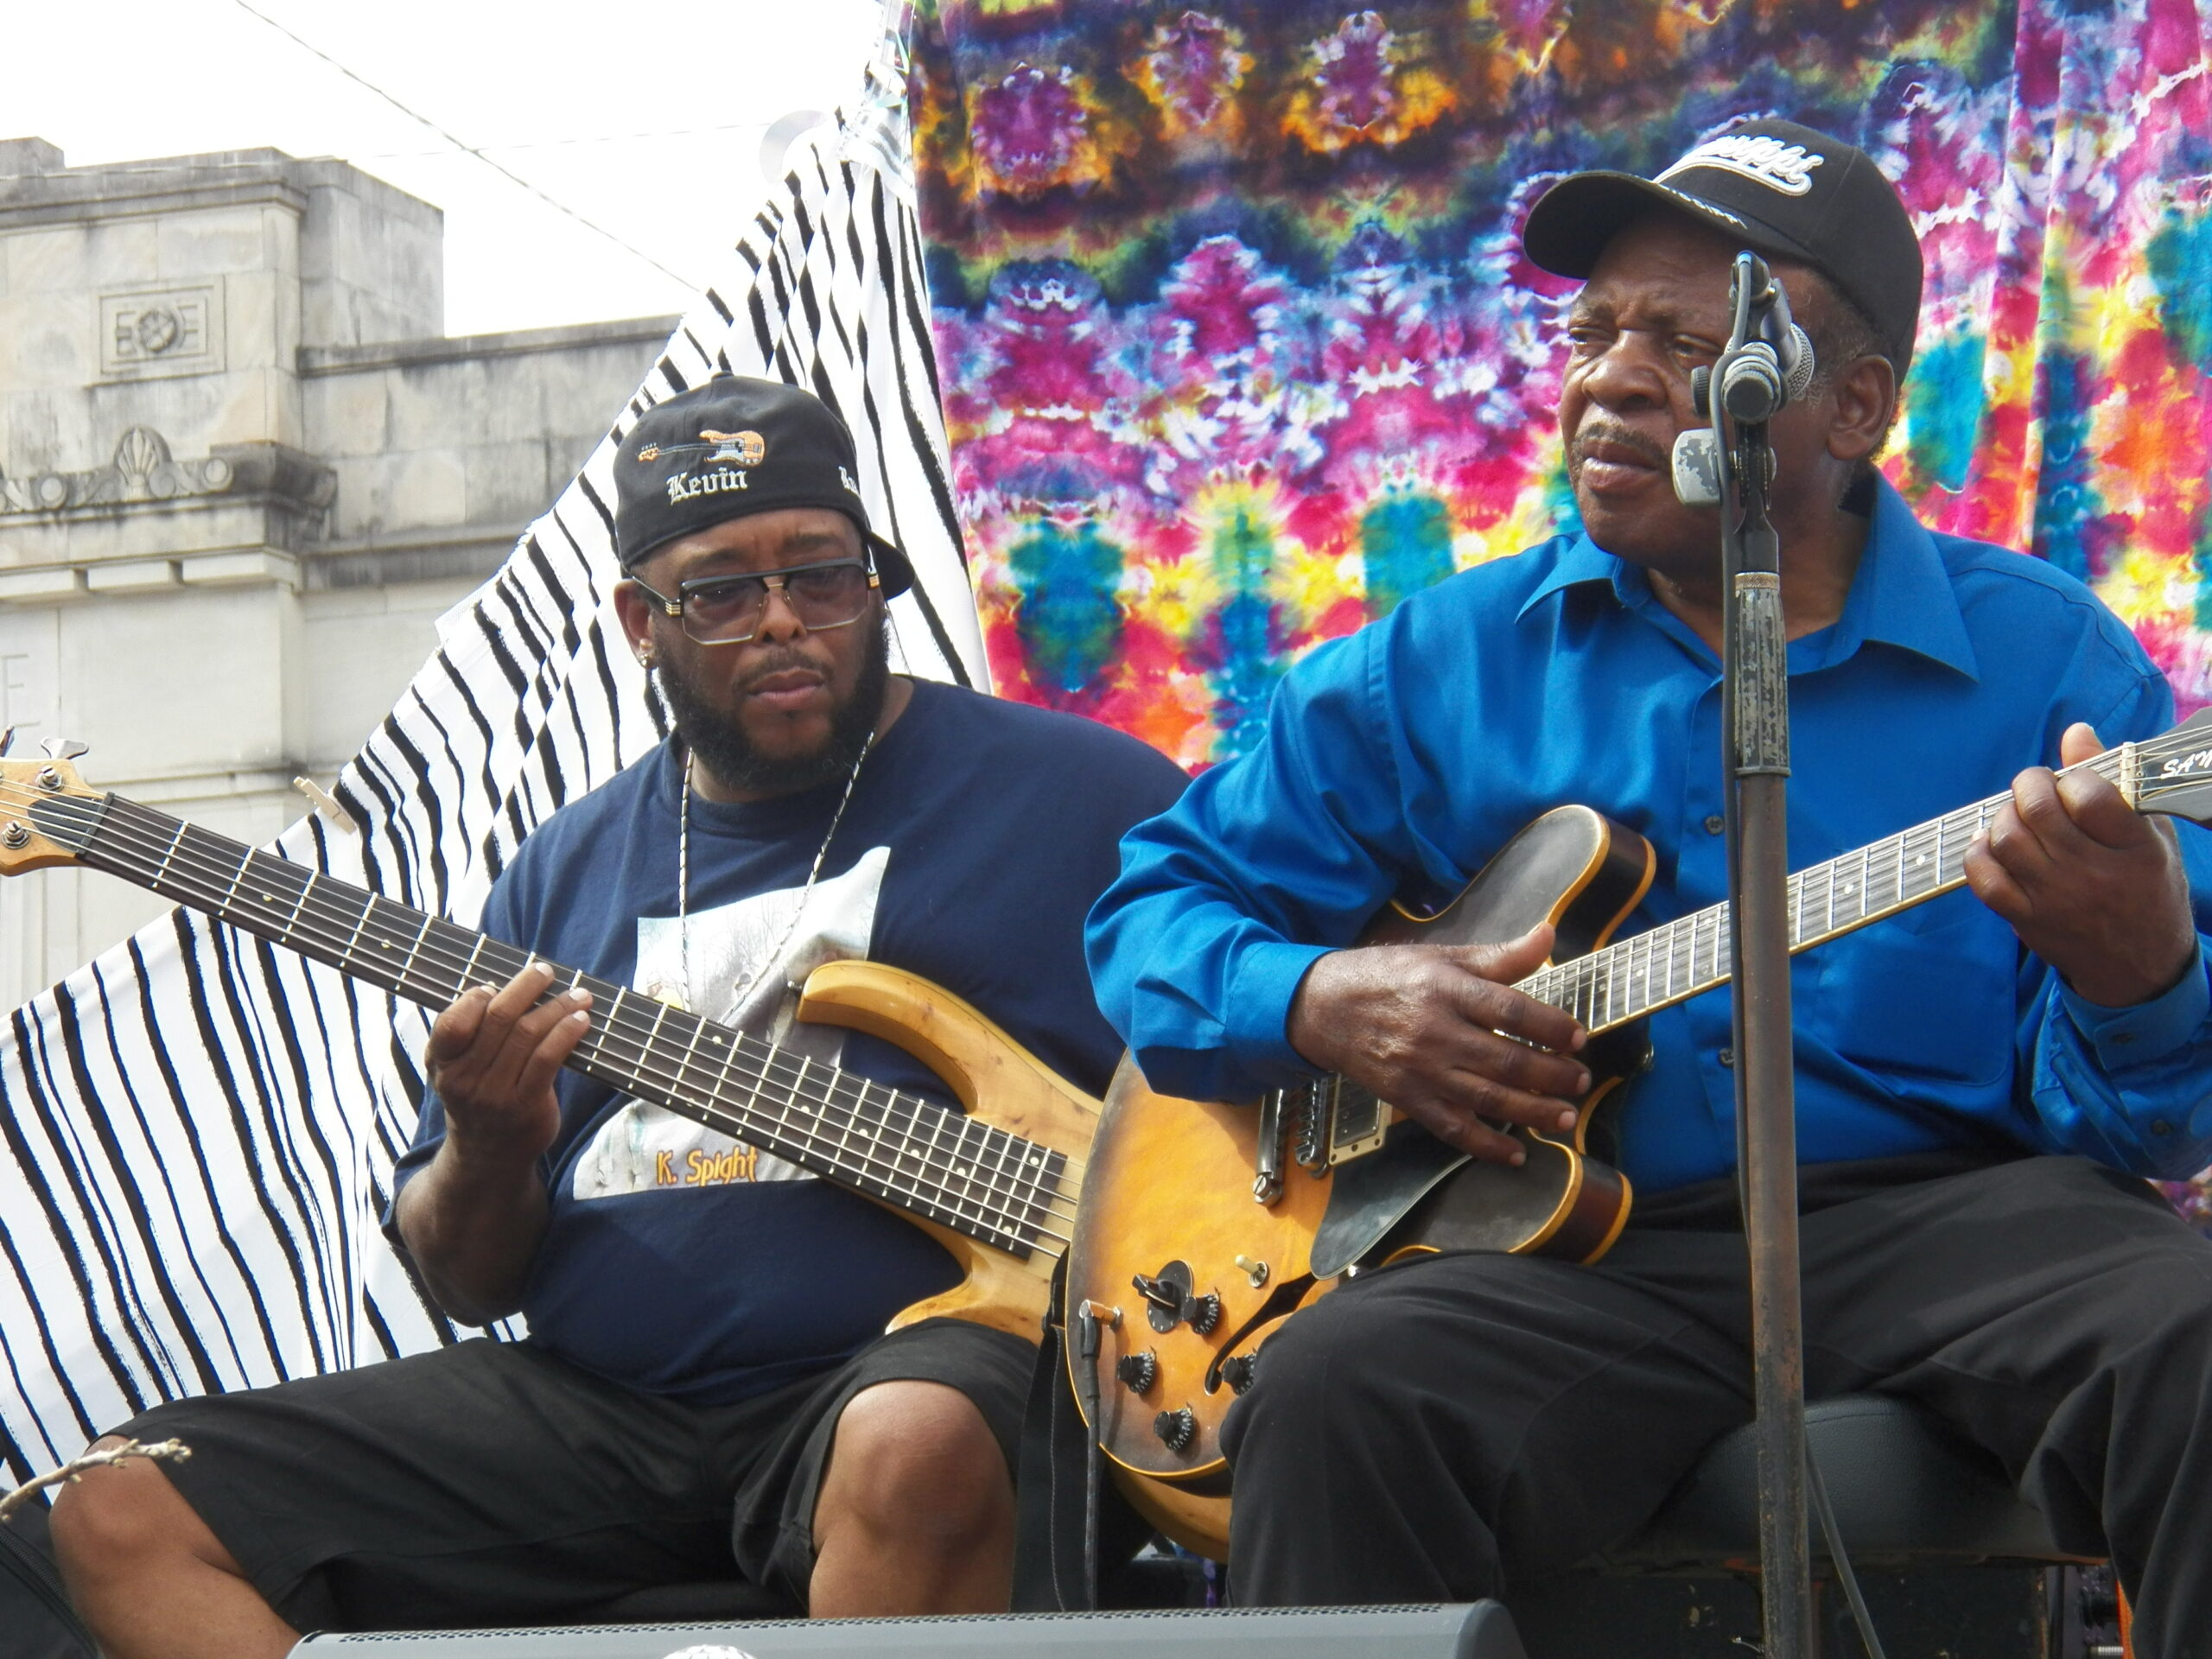 Clarksdale Celebrates The Blues And The Juke Joint Culture That Gave It Birth